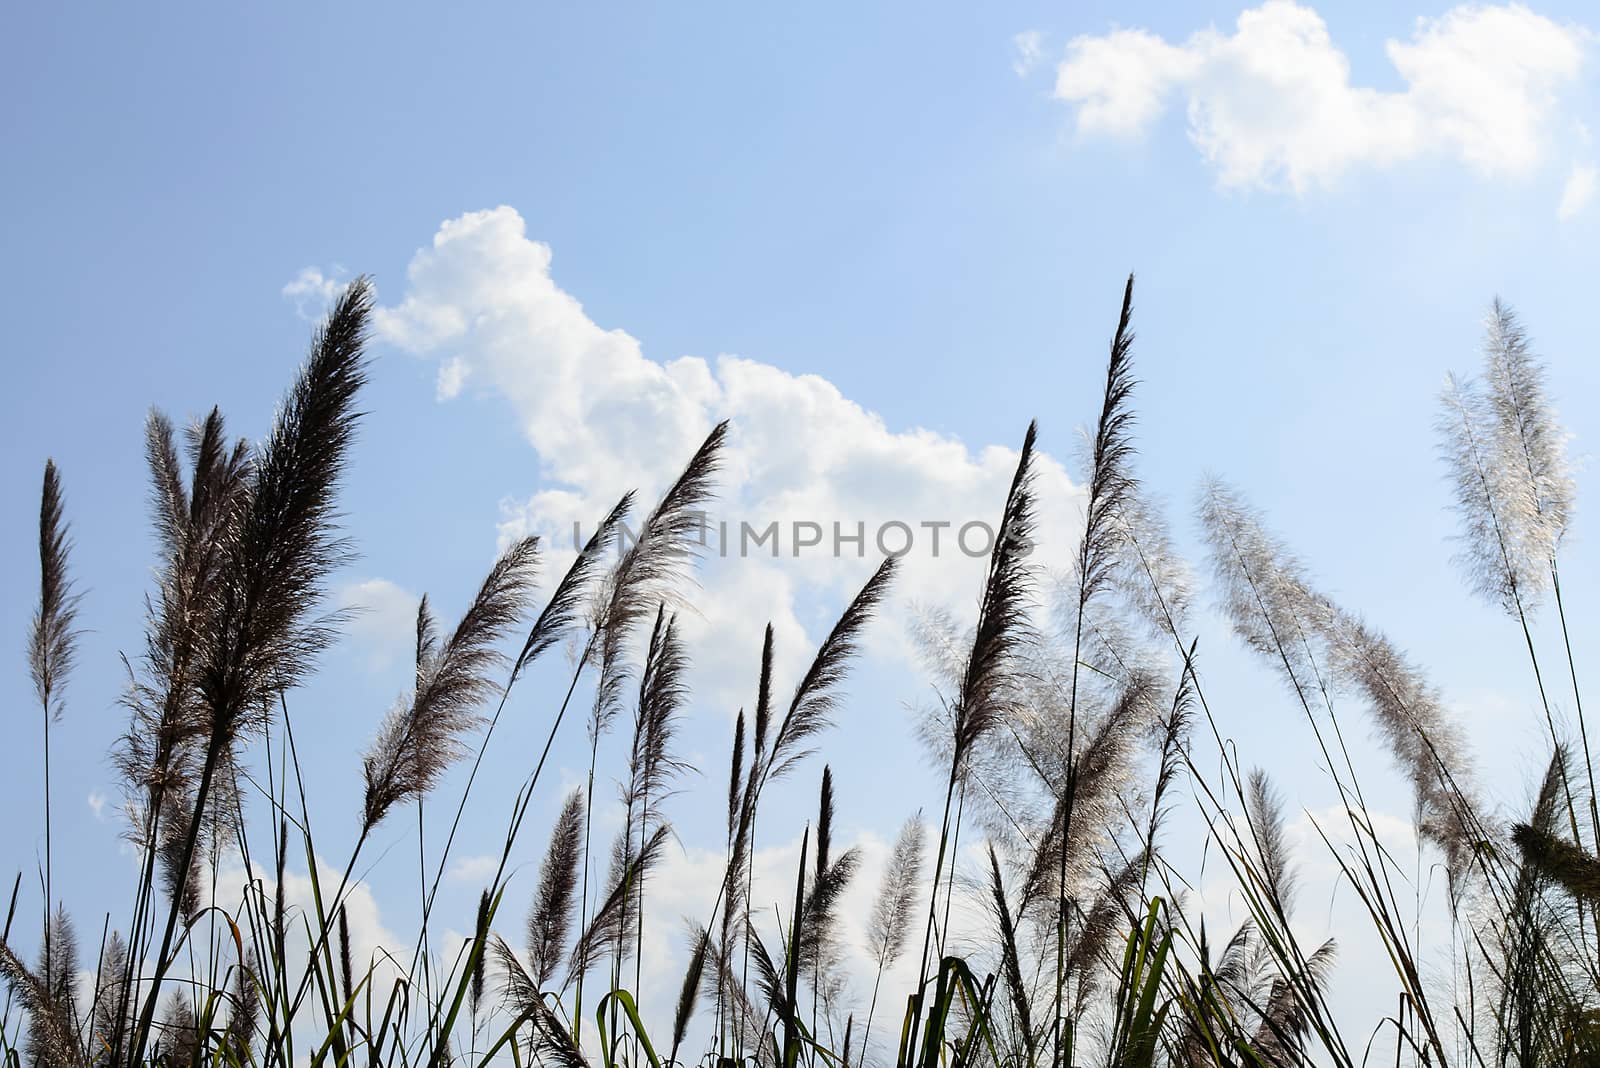 The Feather Grass Flower with Blue Sky.